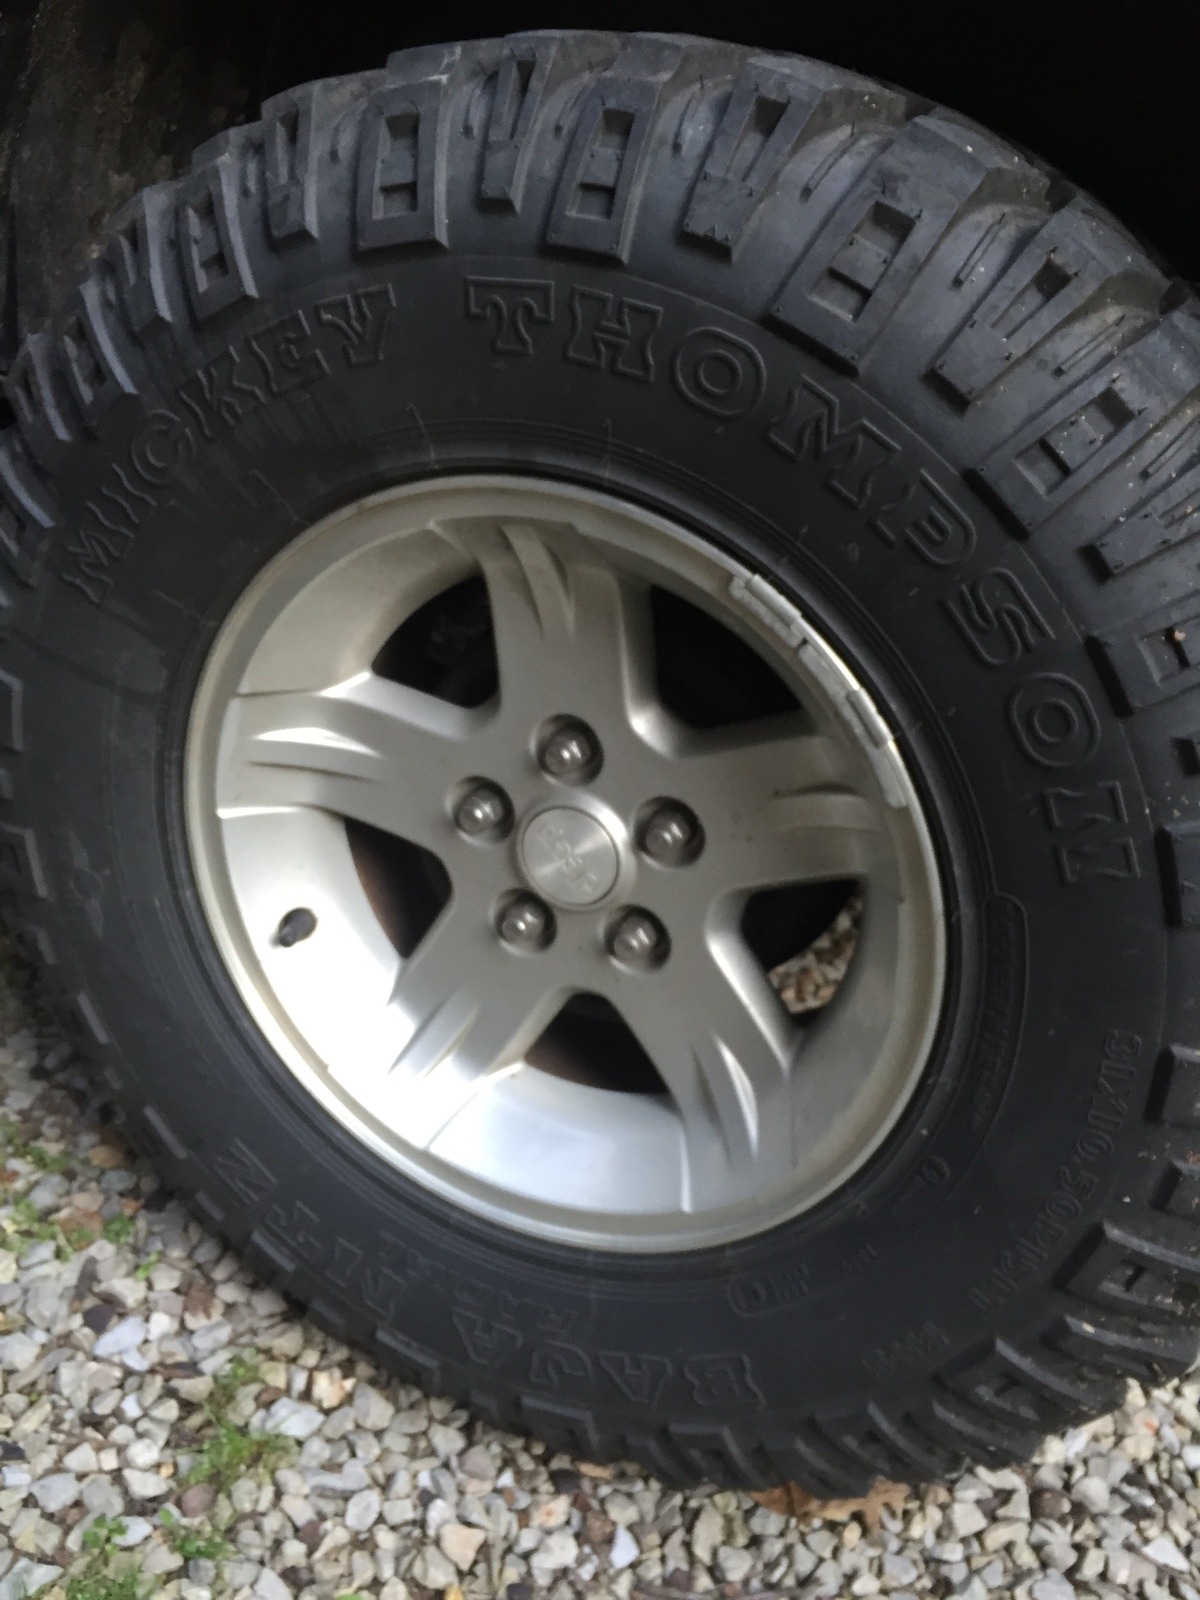 Wondering If 32 /  tires will fit on these stock 16 inch rims. Any  advice is appreciated. | Jeep Wrangler TJ Forum